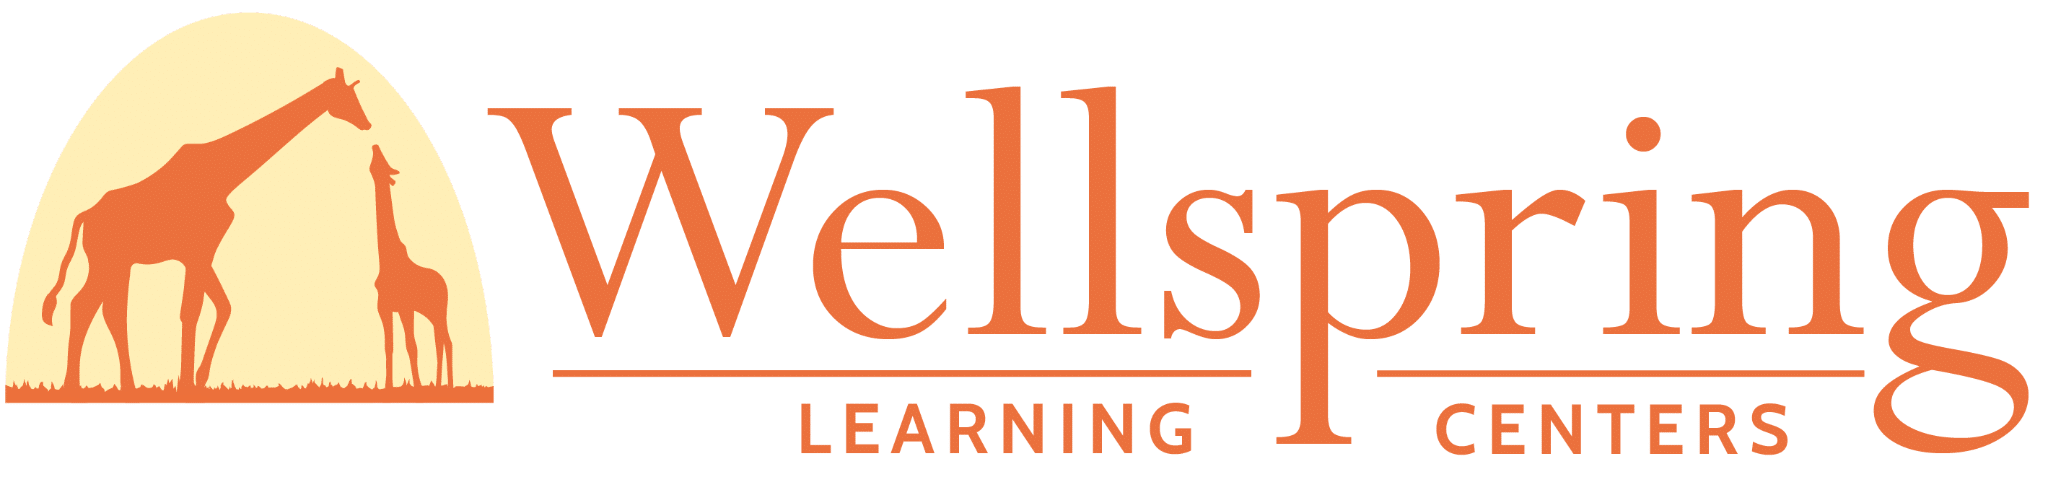 Wellspring Learning Centers